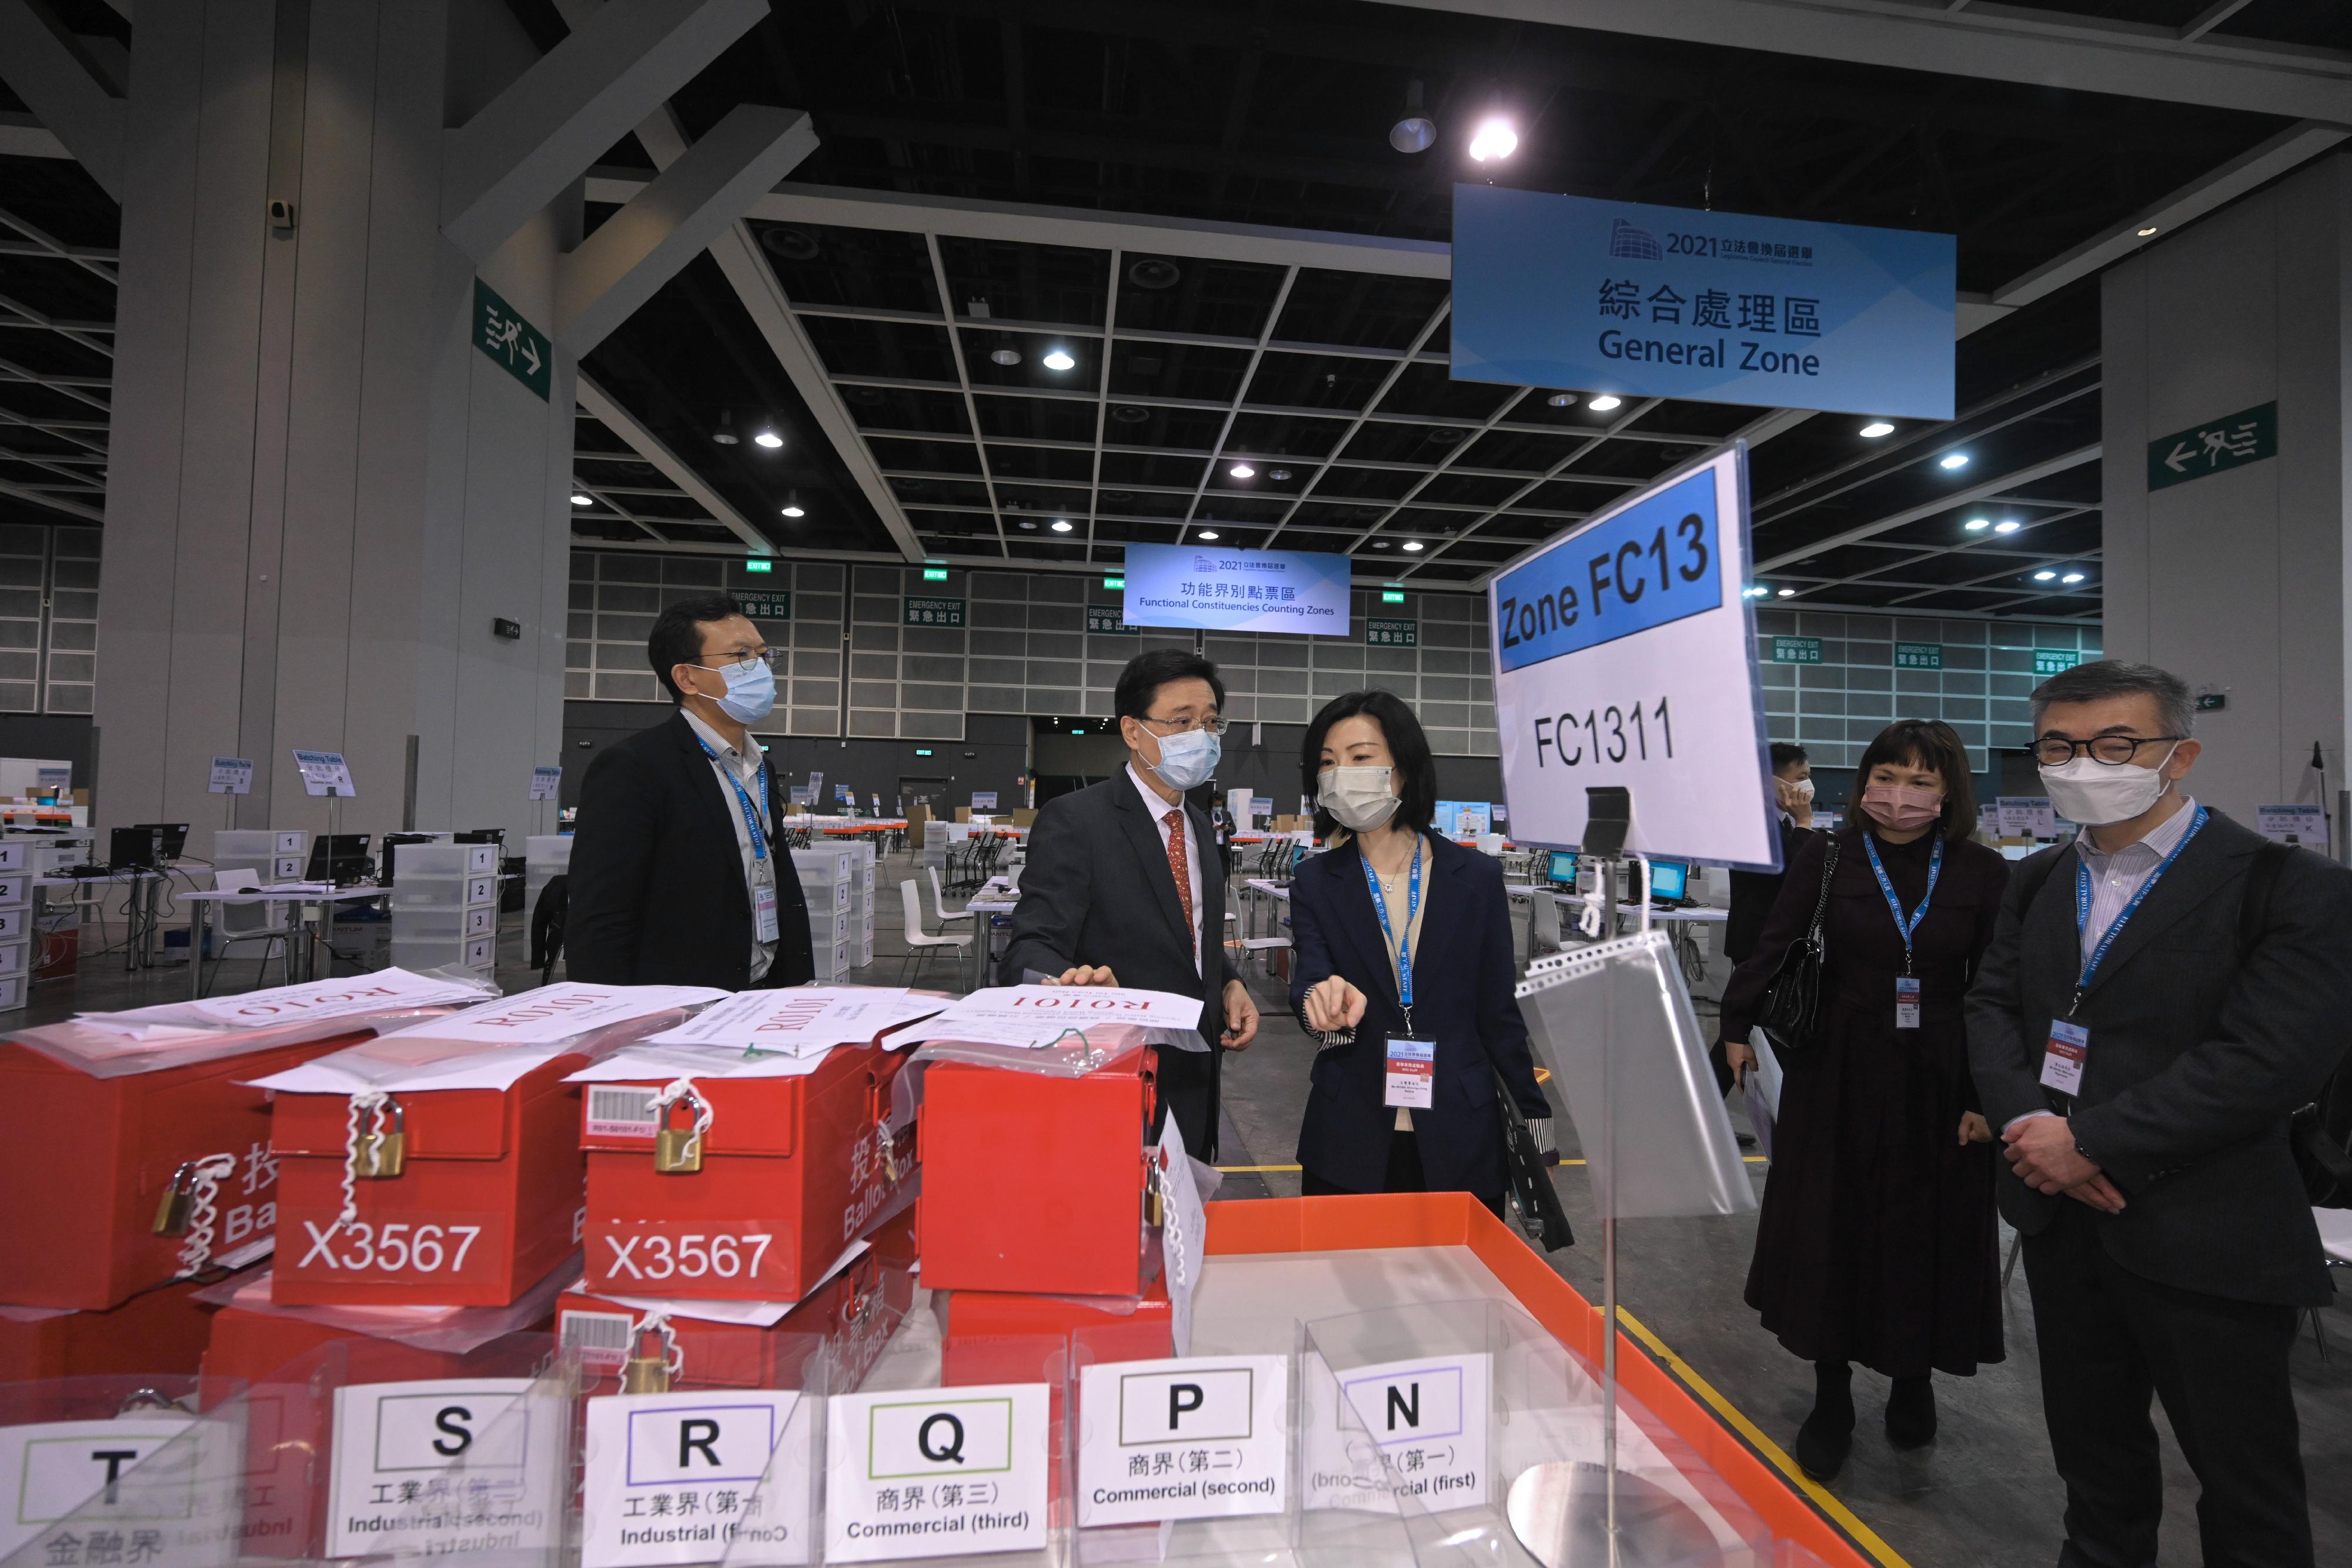 The Chief Secretary for Administration, Mr John Lee, visited the Hong Kong Convention and Exhibition Centre today (December 17) to inspect the preparatory work progress of the central counting station for the Legislative Council General Election. Photo shows Mr Lee (second left) being briefed by a staff member on the preparations for the counting procedures.